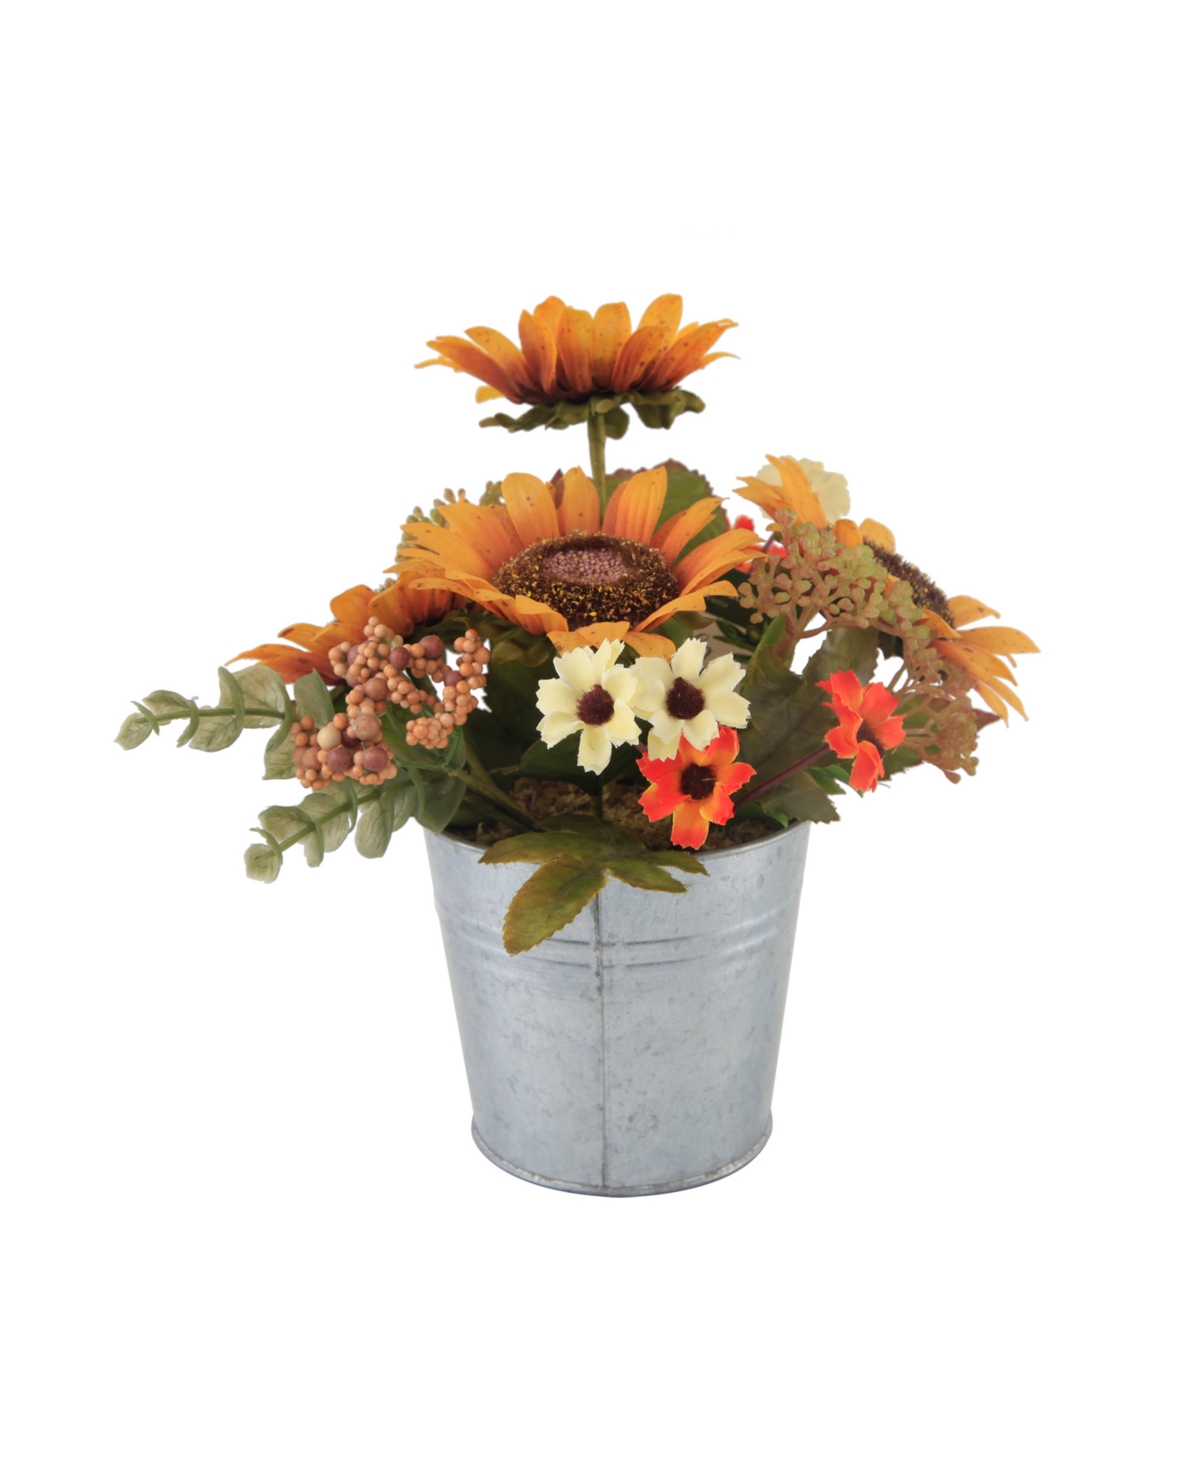 8" Artificial Sunflowers Mix in Tin Pot - Yellow